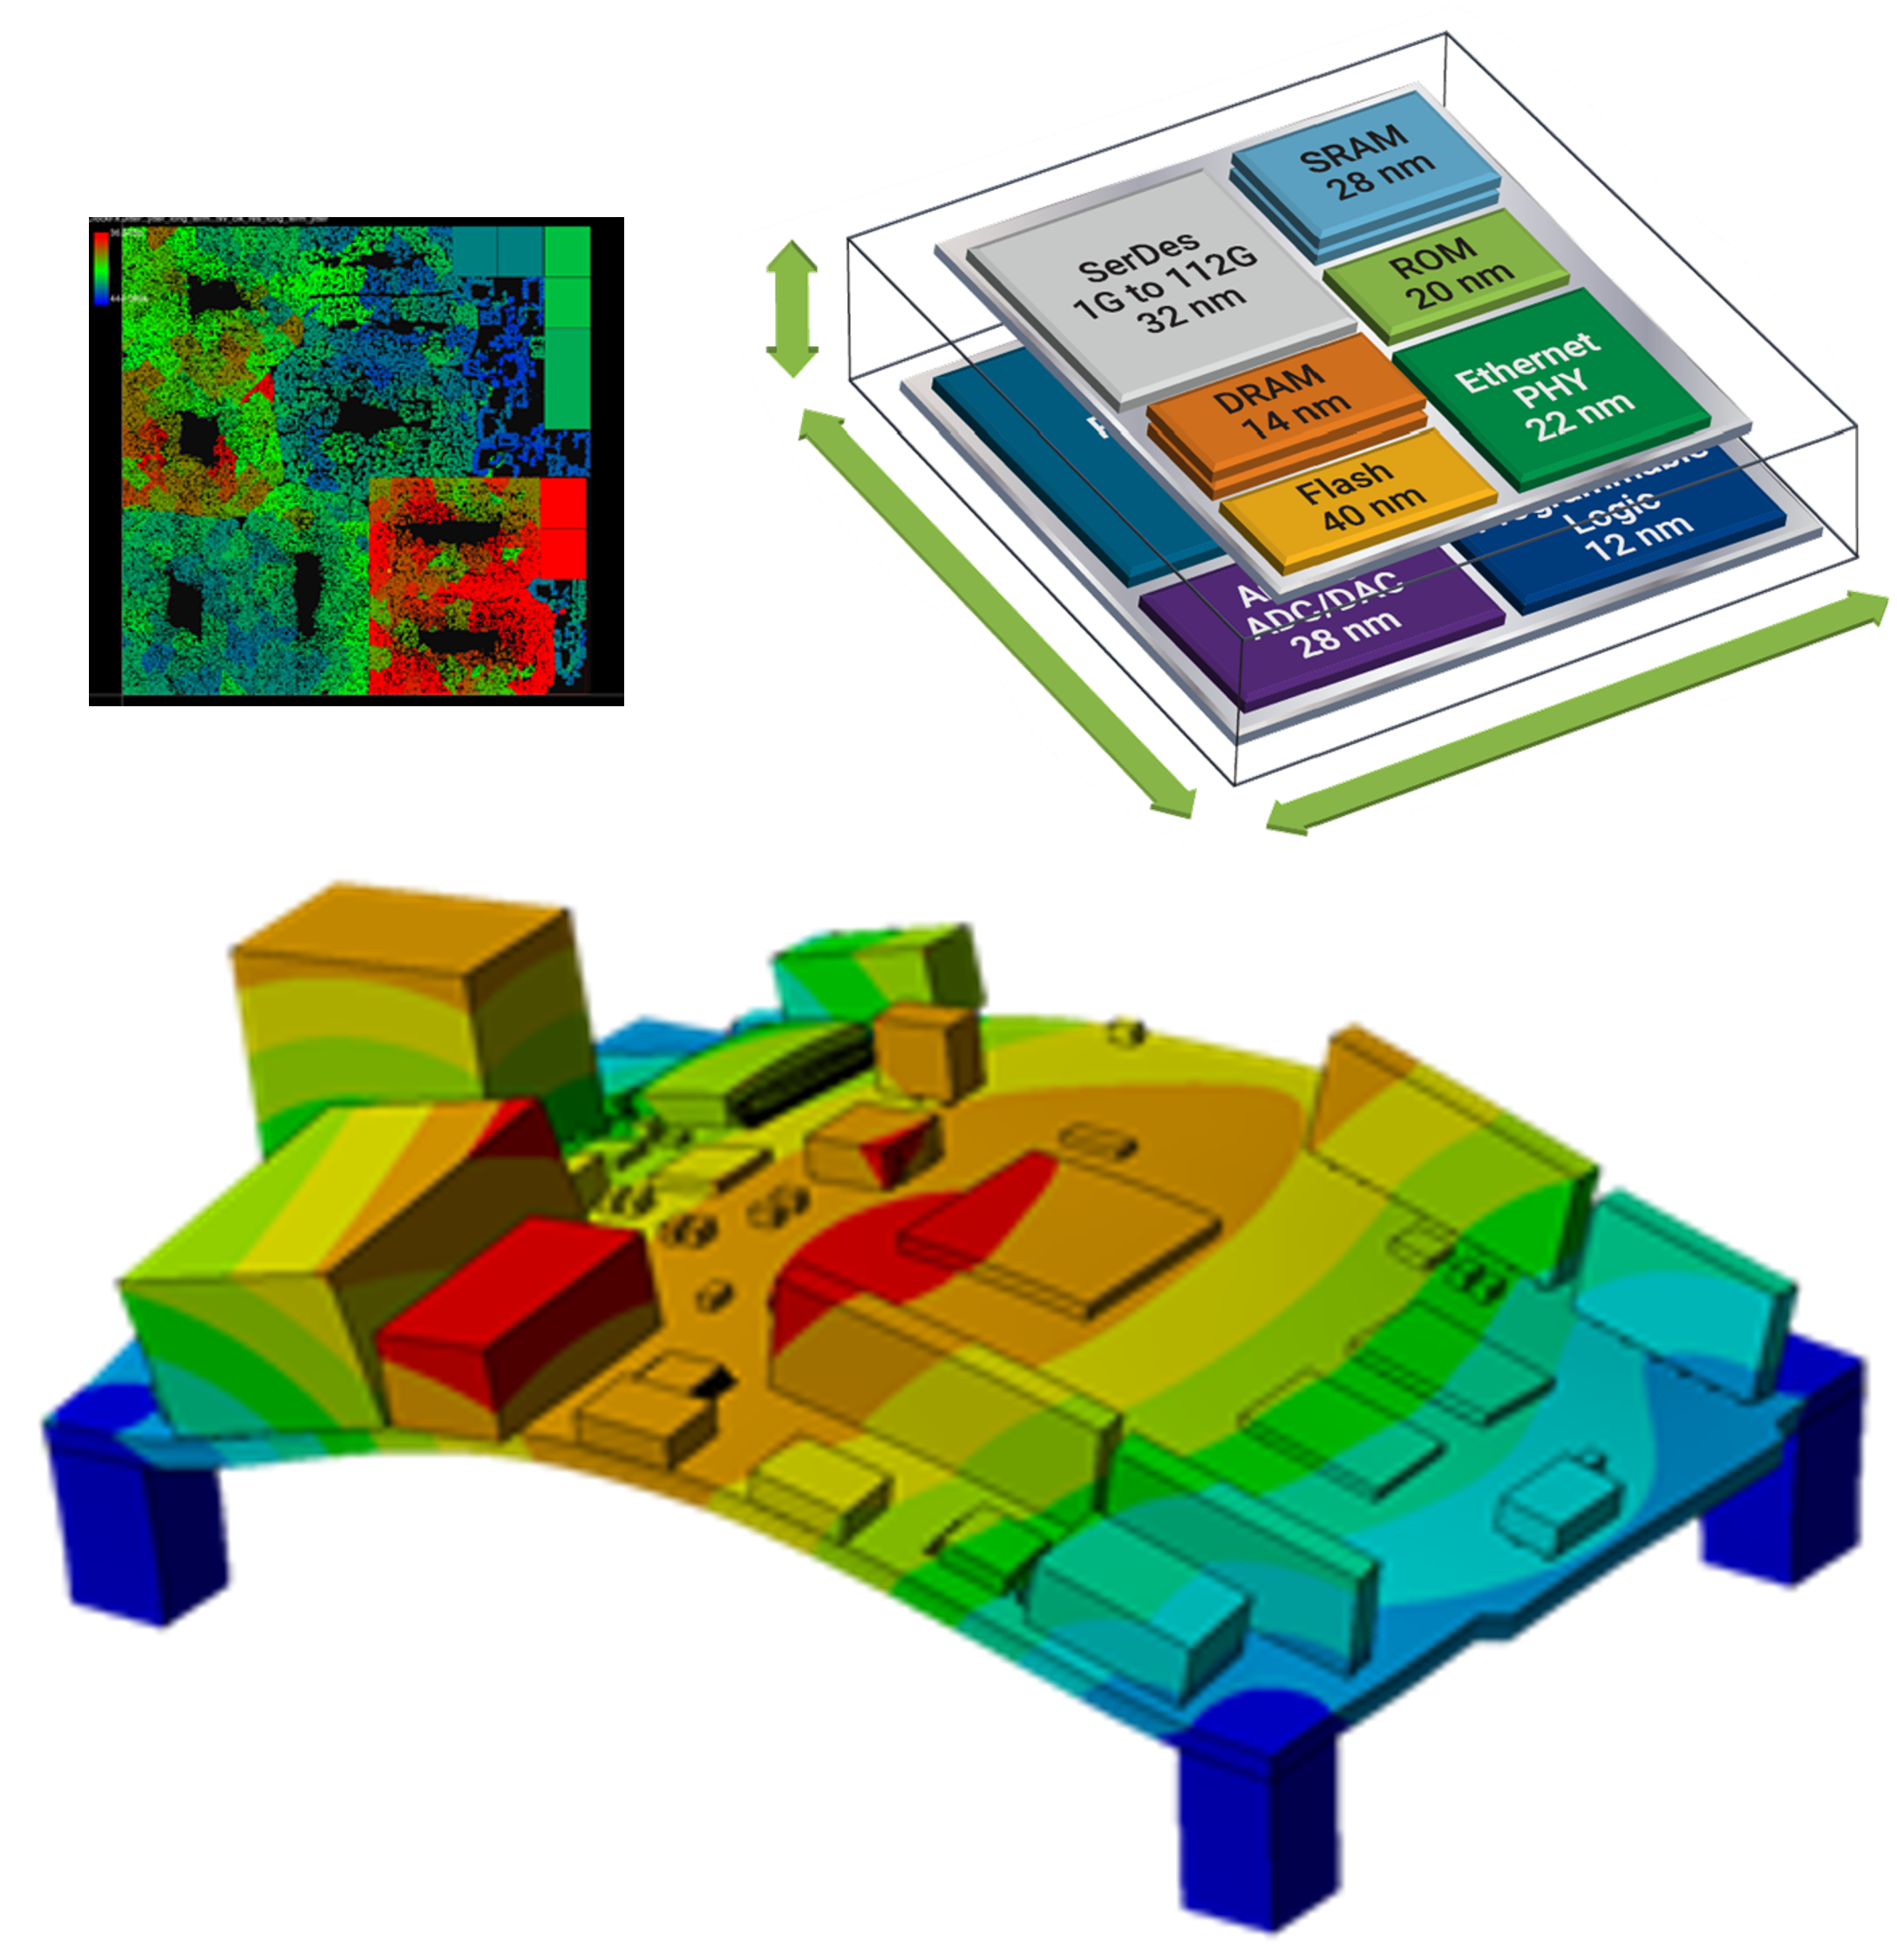 Ansys chip package board